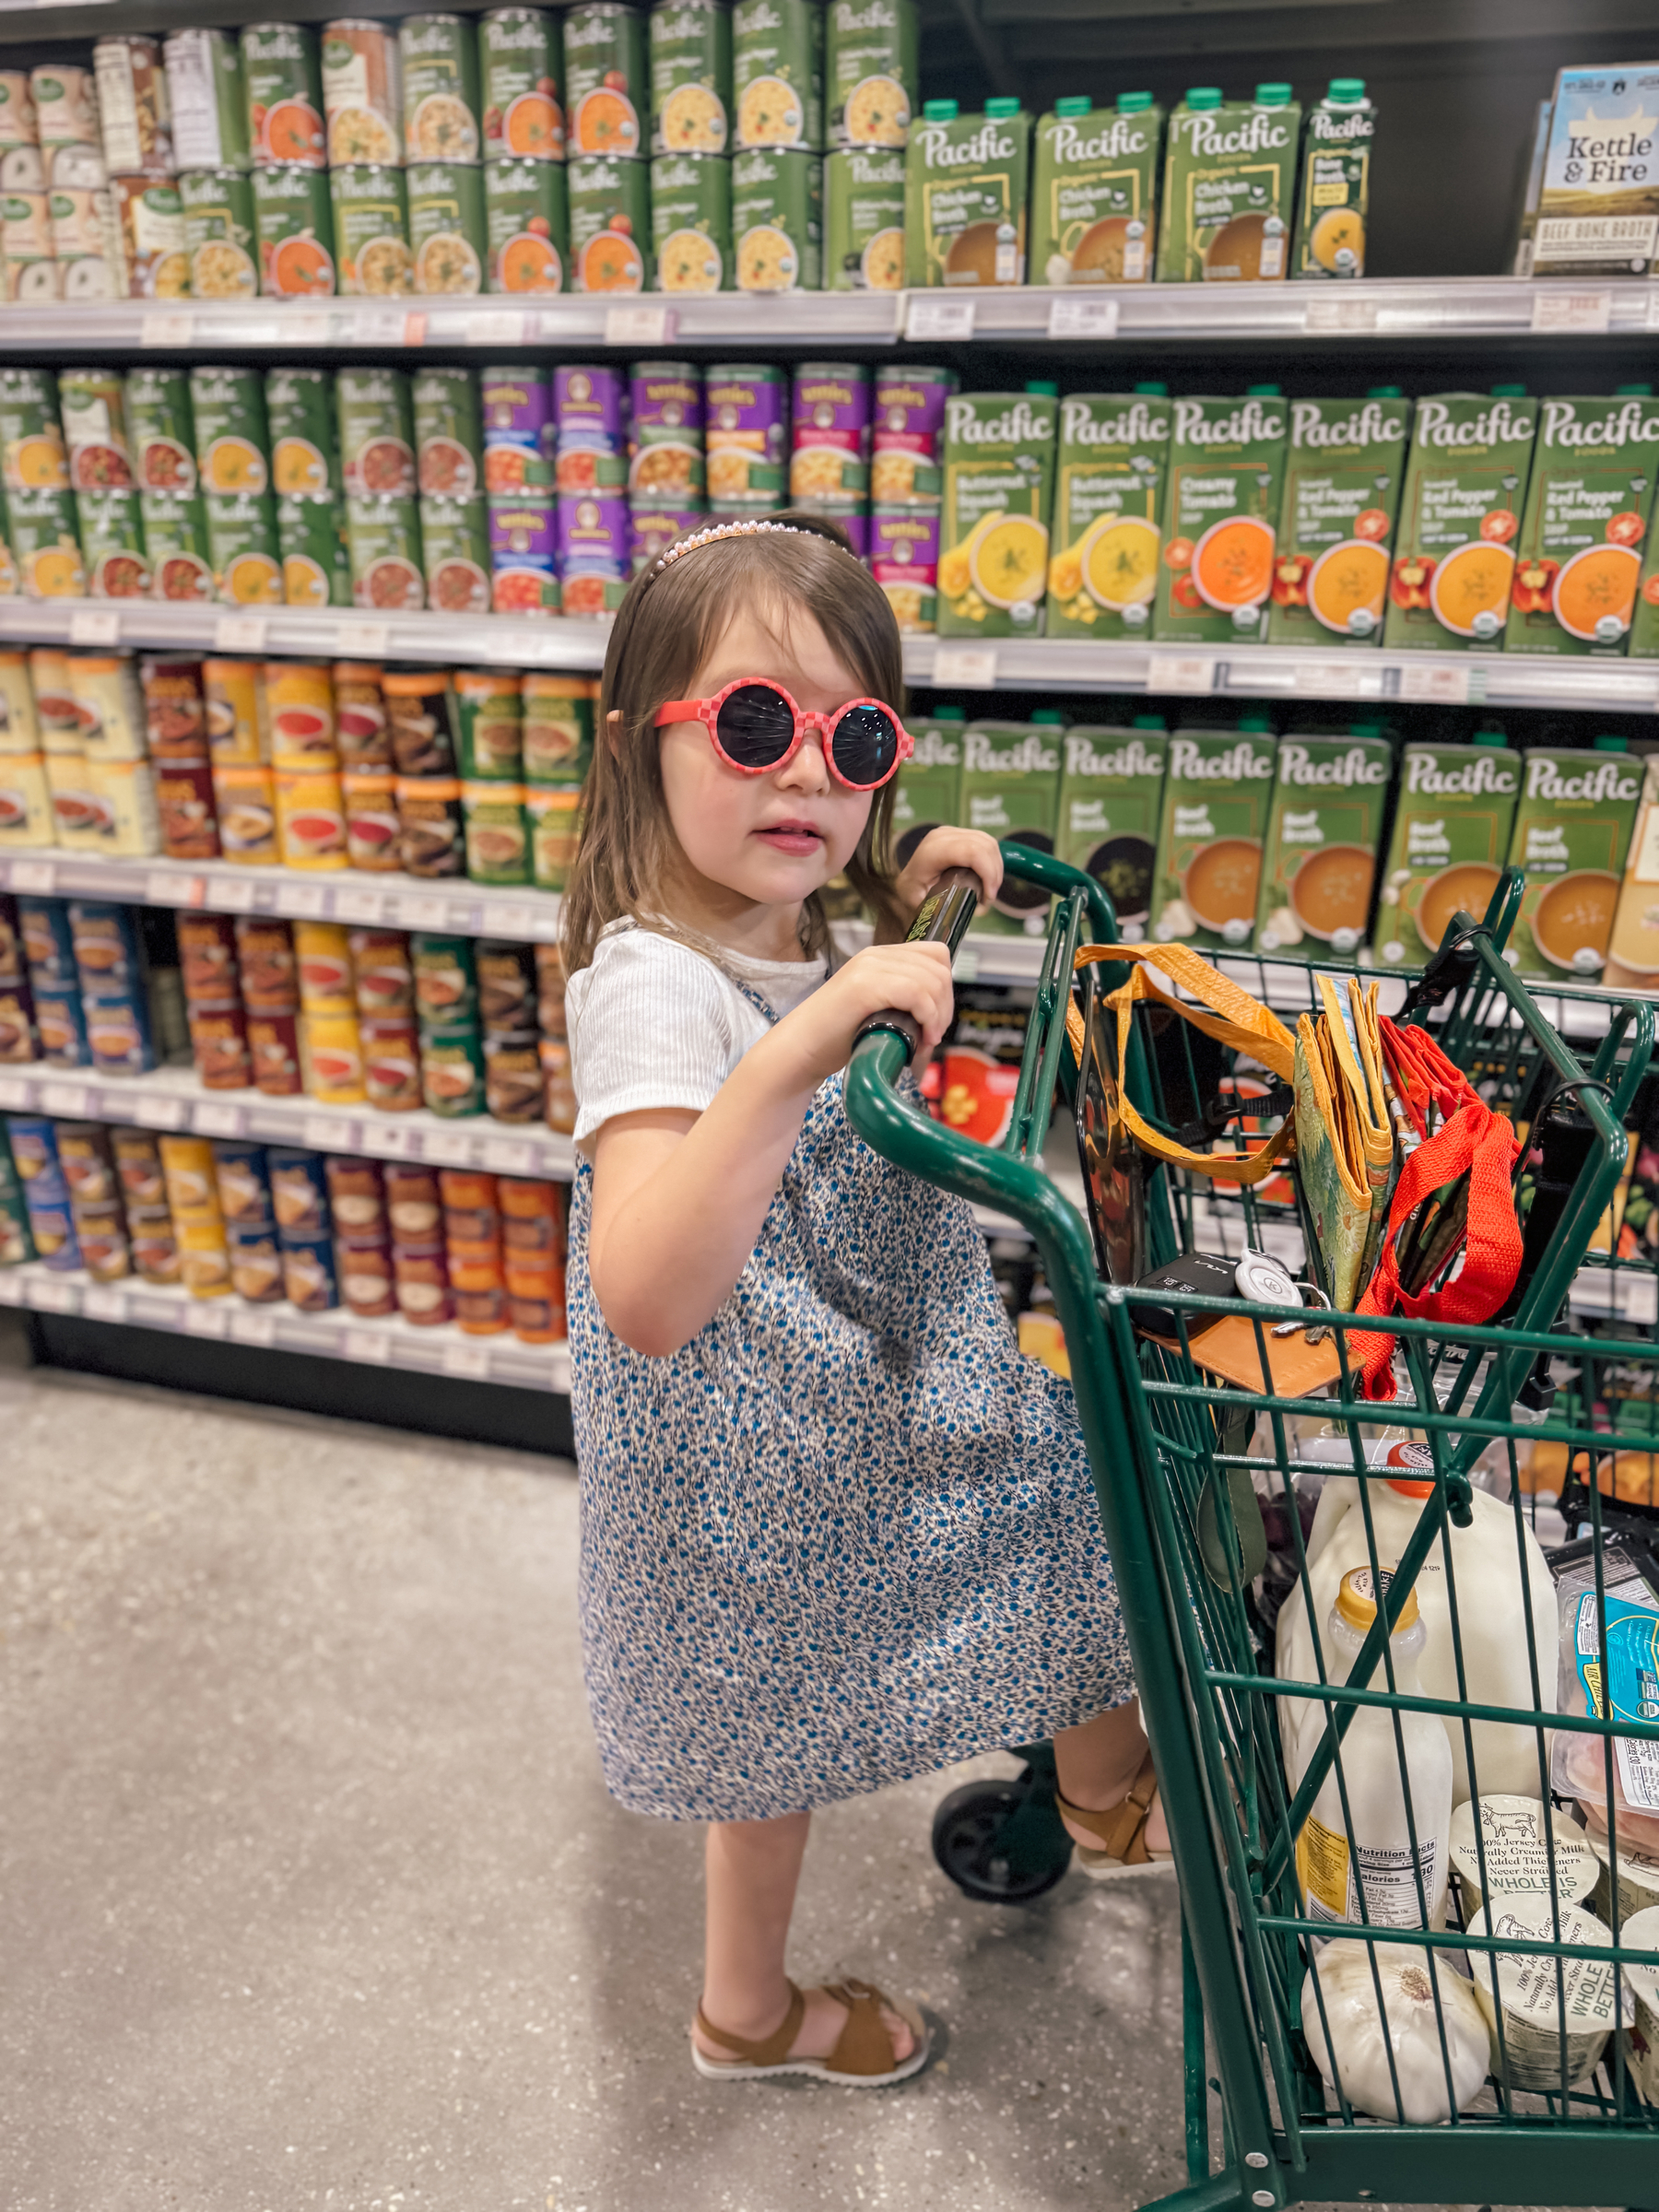 A 5-year-old girl pushing a buggy at the grocery store